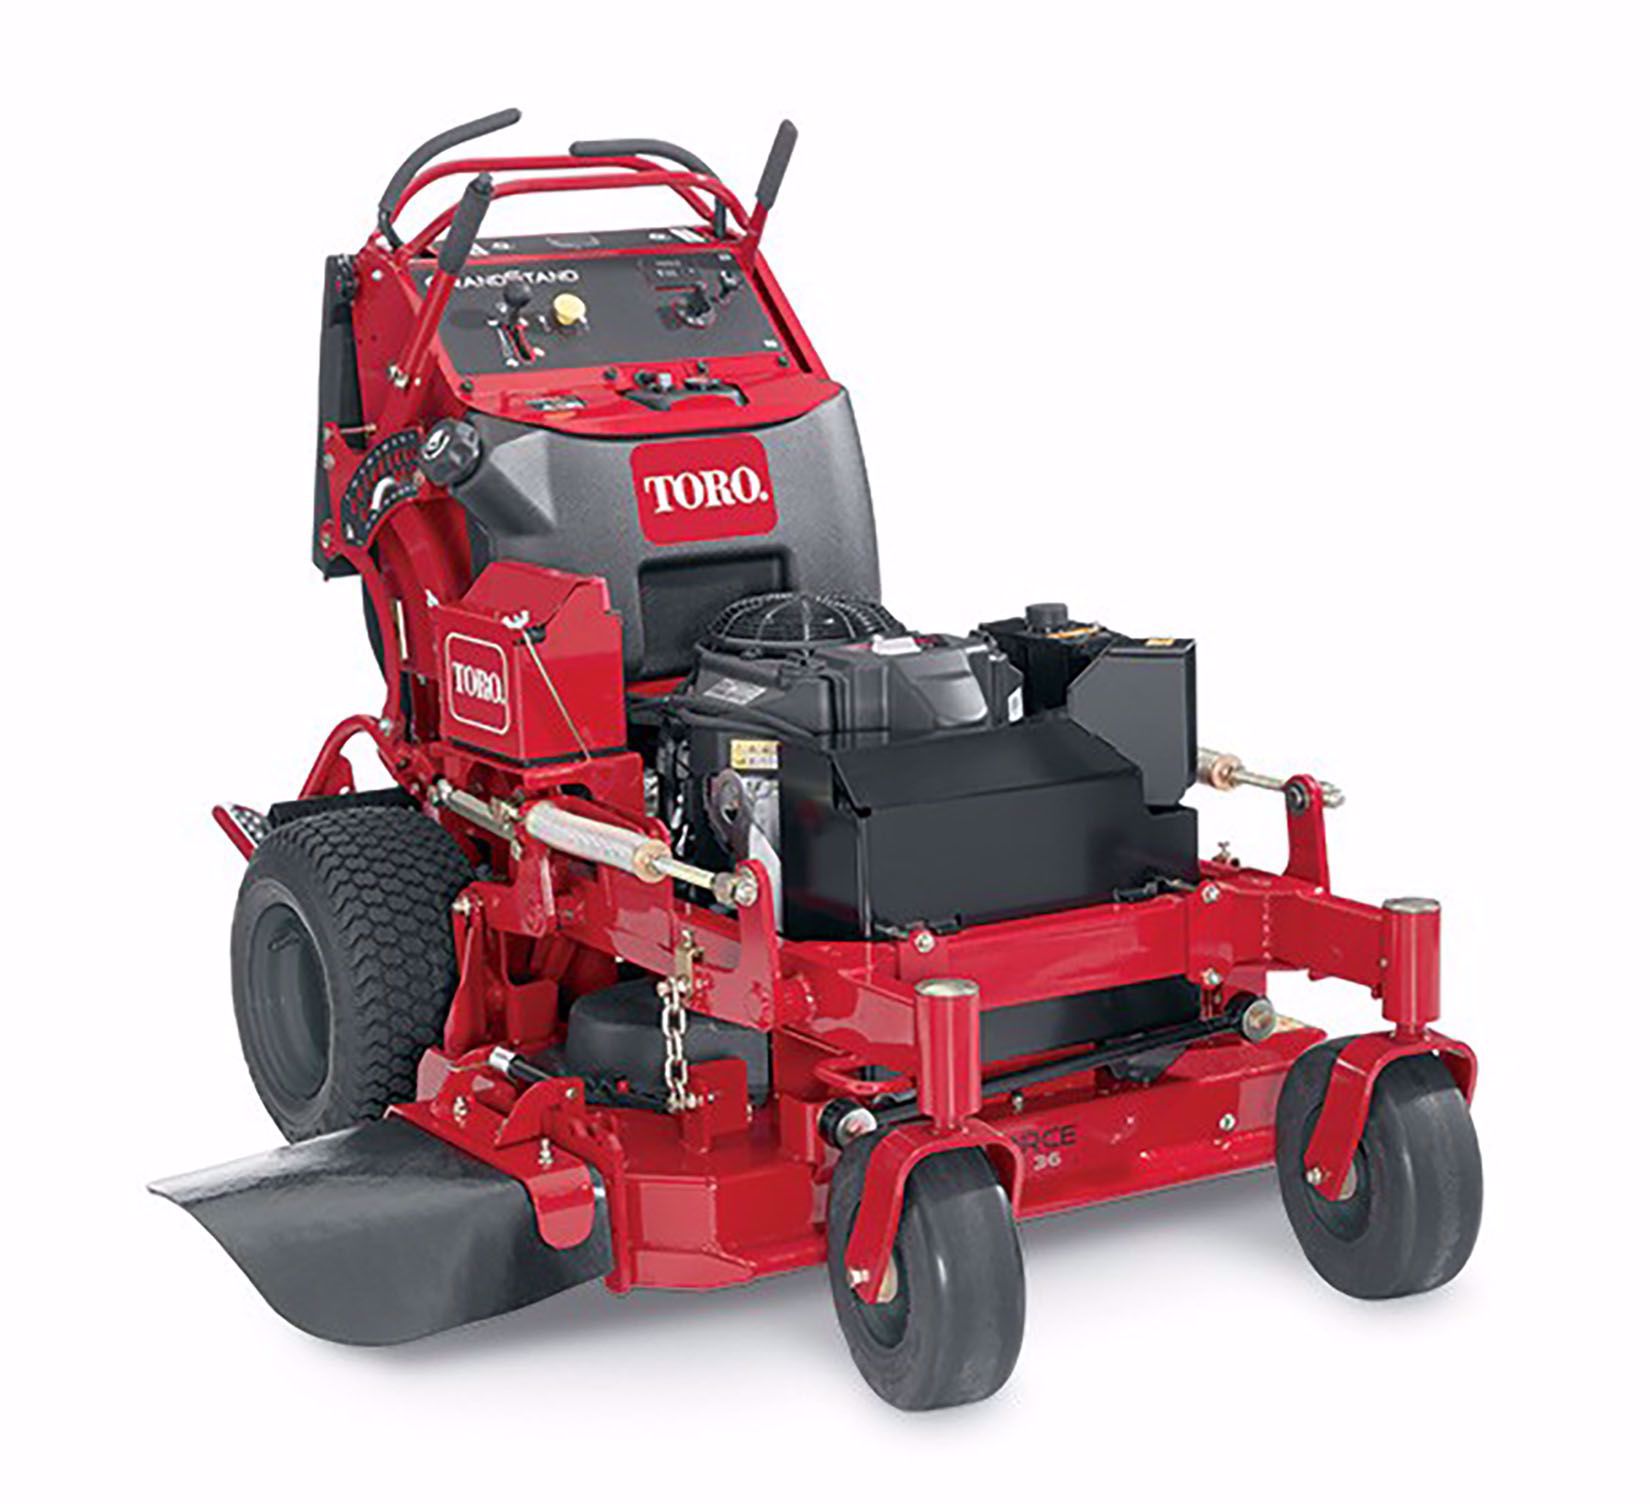 74534 Toro 36" Grandstand Commercial Mower with Turbo Force Deck. Do